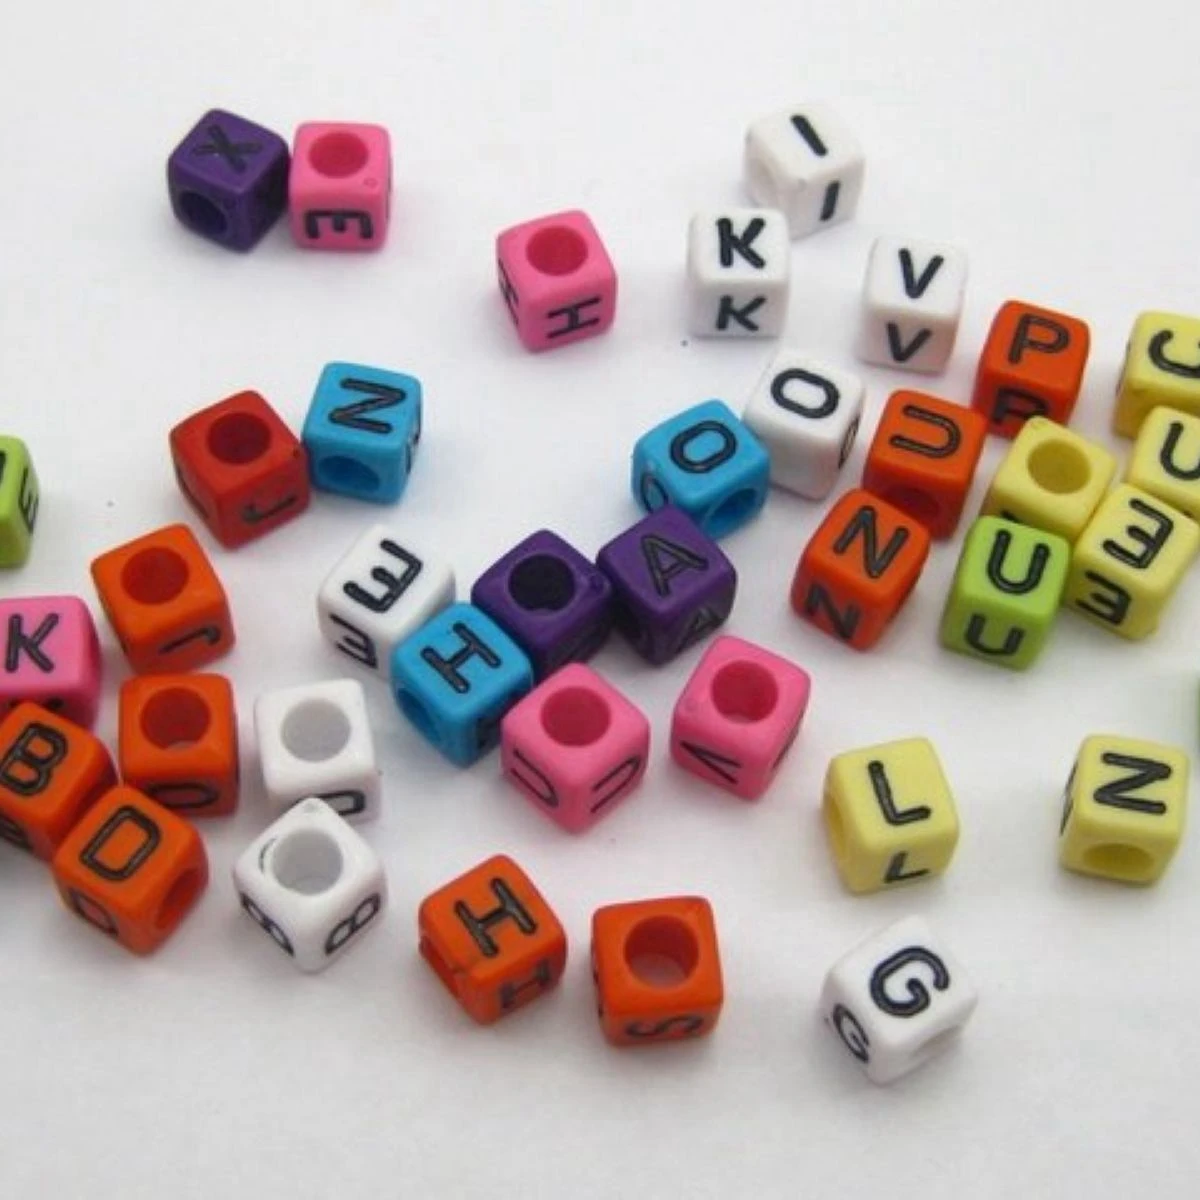 250 Assorted Alphabet Letter Acrylic Cube Beads 6X6mm